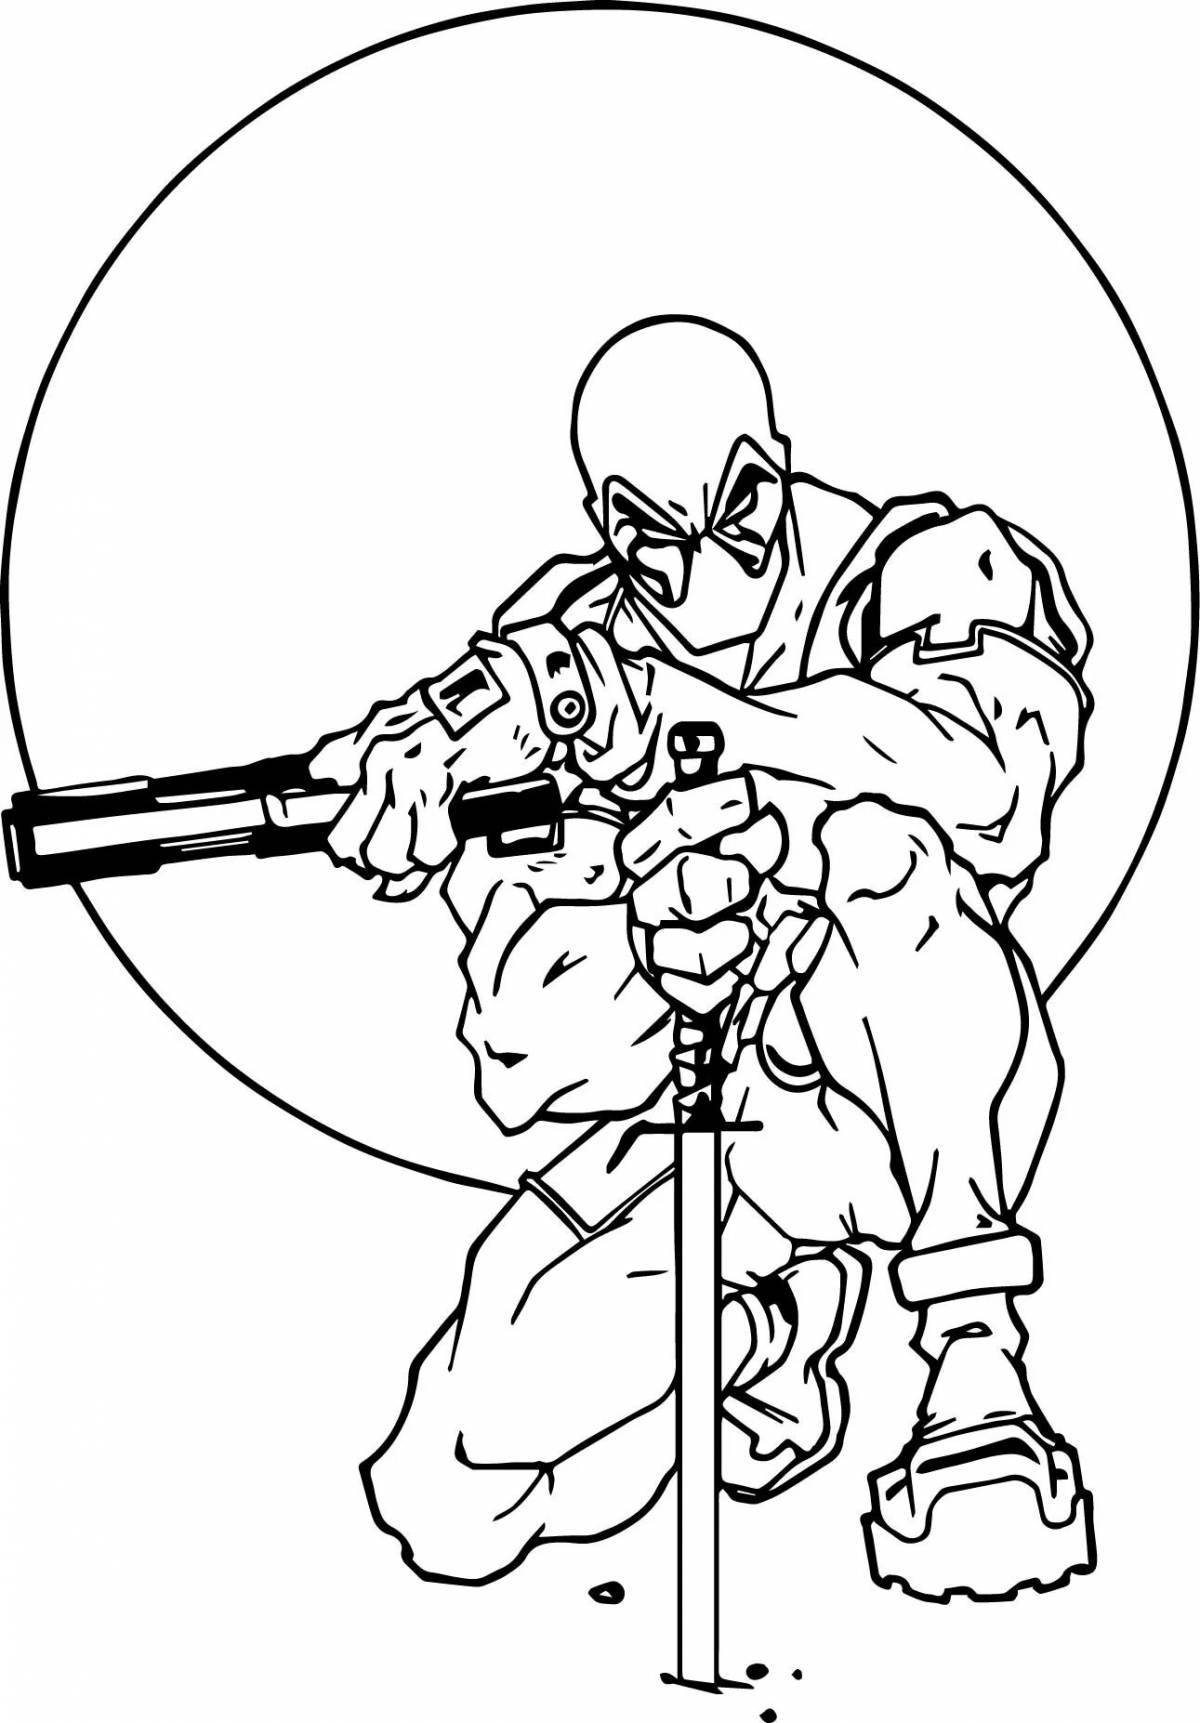 Shining deadpool coloring page